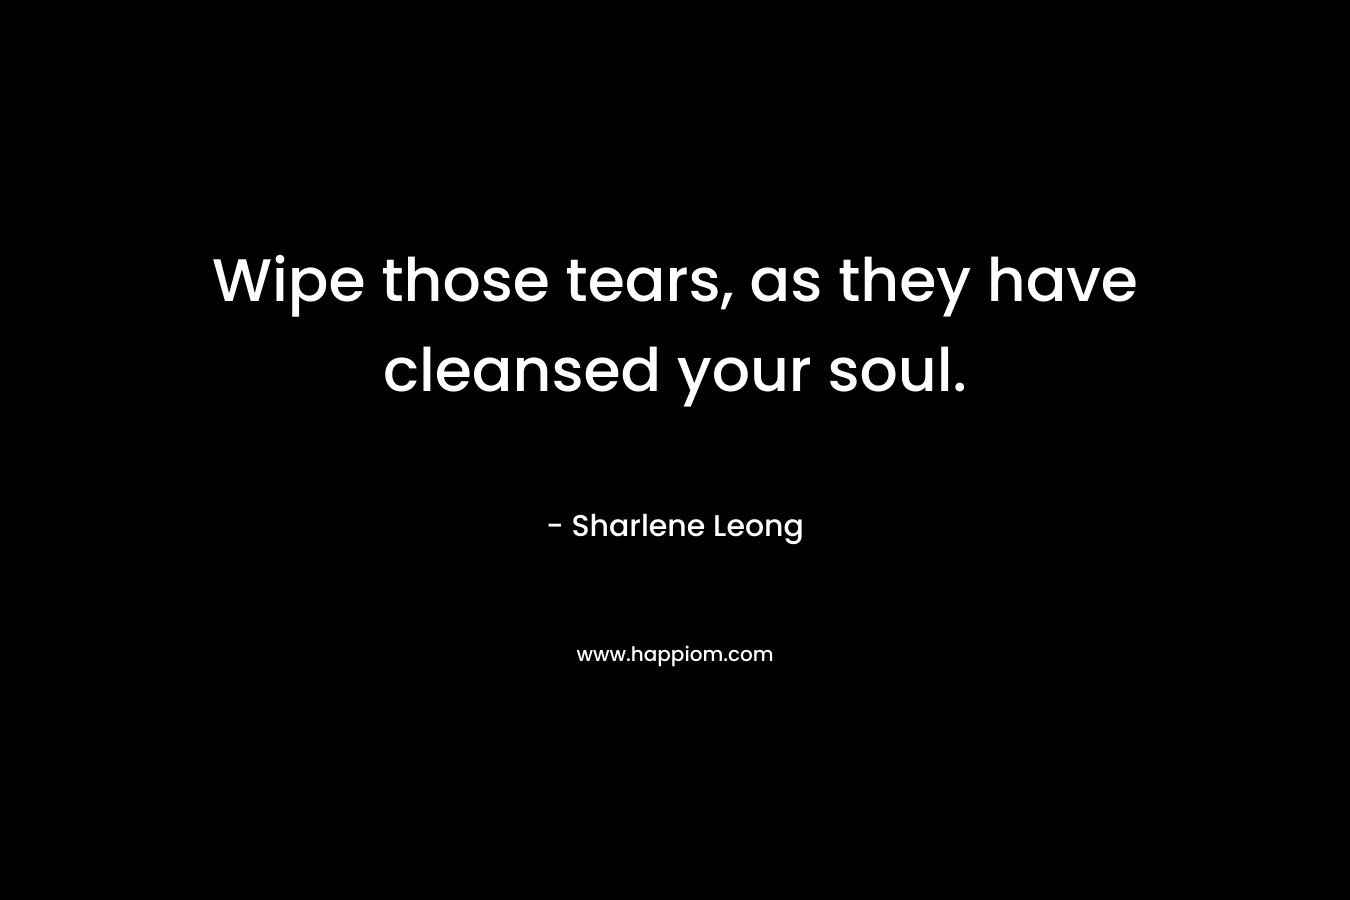 Wipe those tears, as they have cleansed your soul.